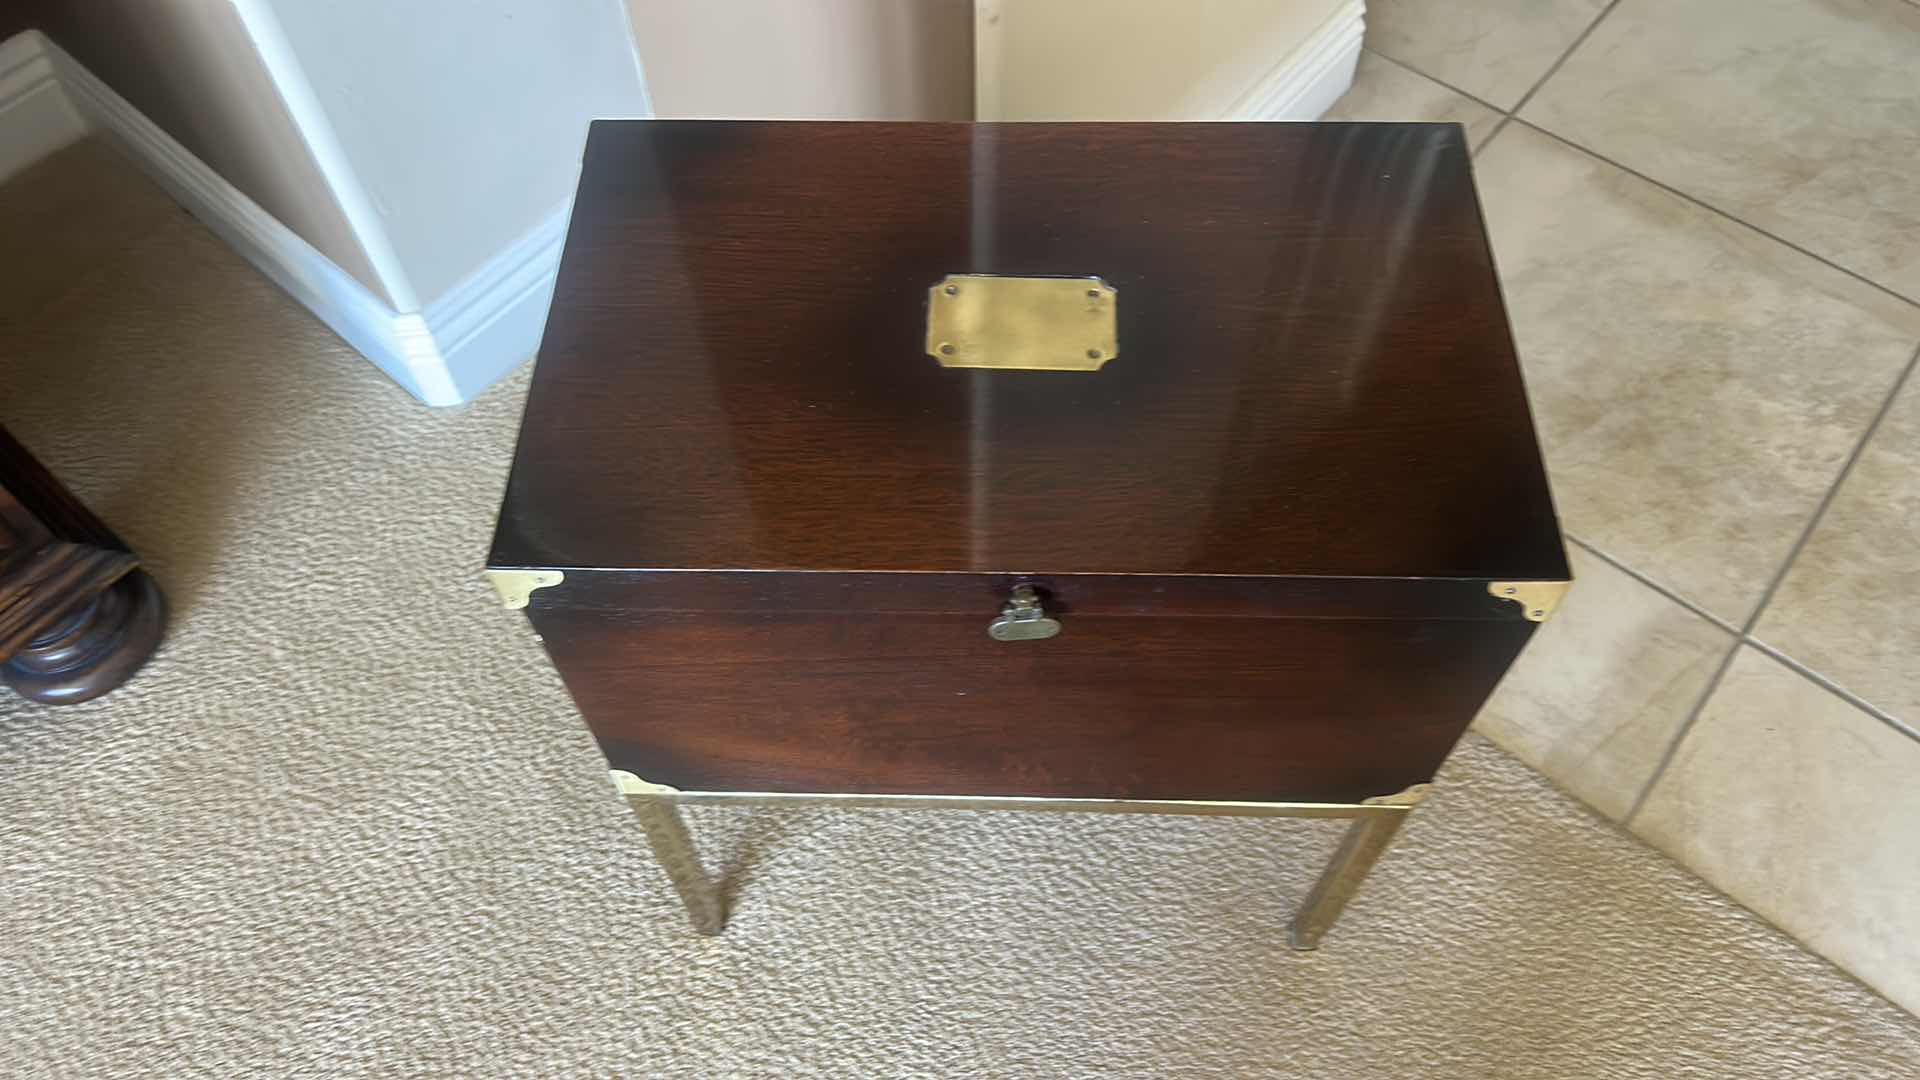 Photo 2 of HEAVY WOOD CHEST WITH BRASS ACCENT ON BRASS LEGS 18” x 11” x 21”